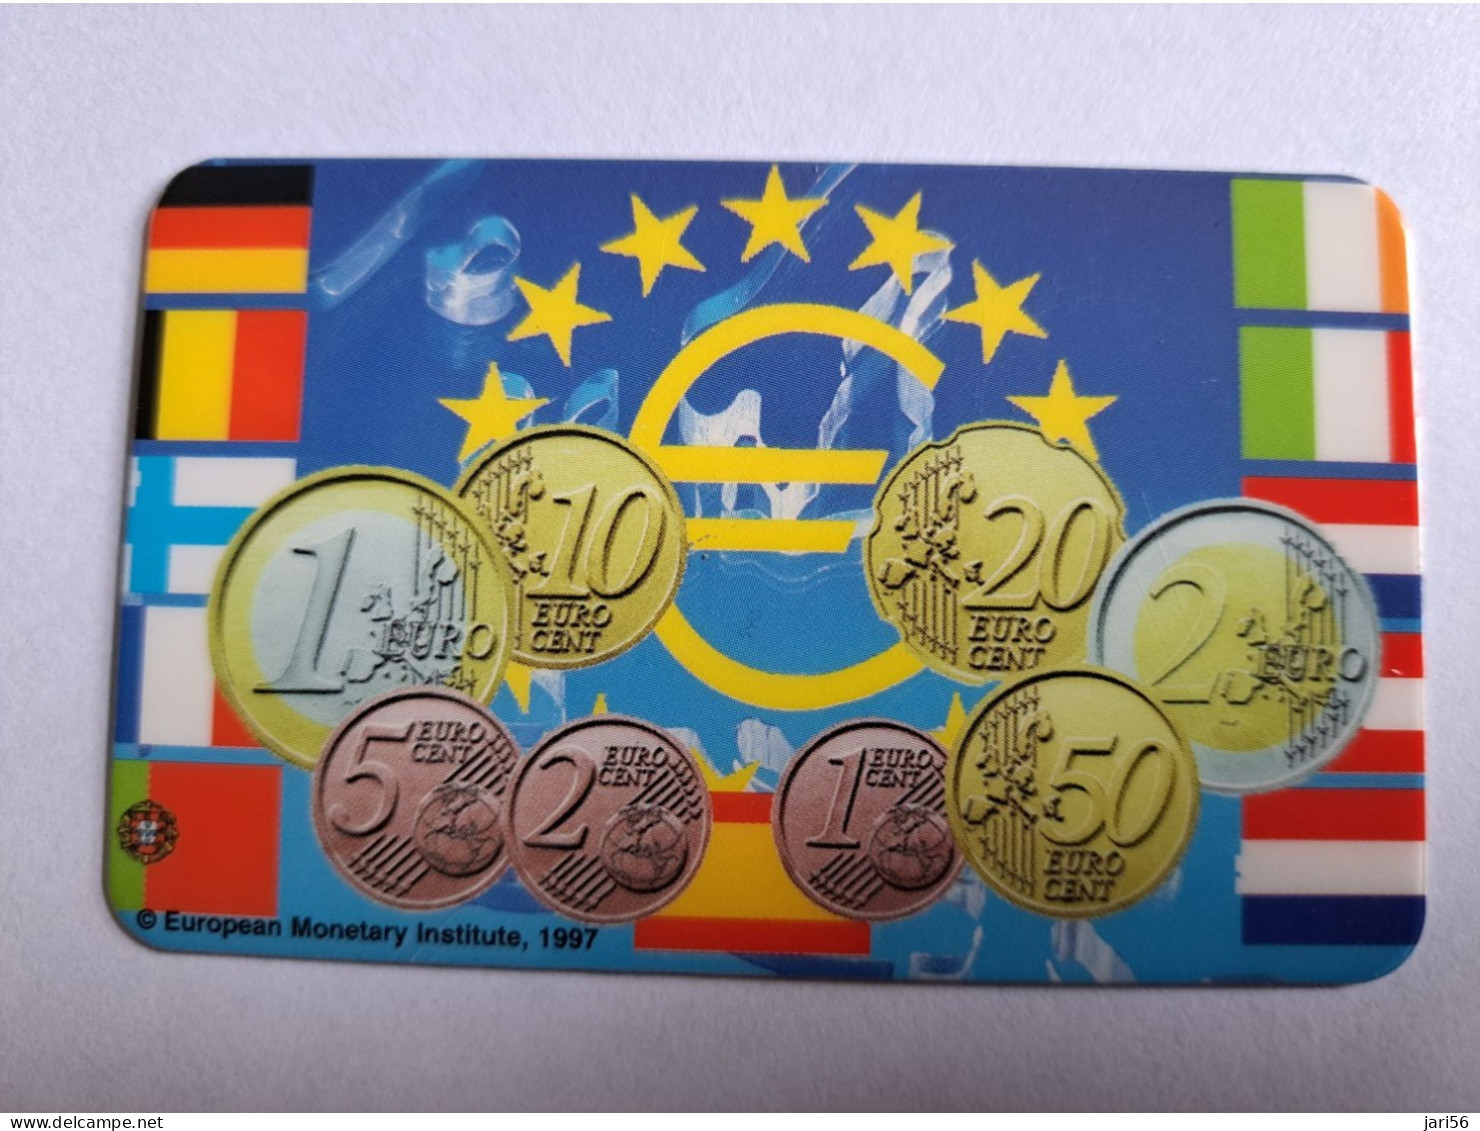 GREAT BRITAIN   20 UNITS   / EURO COINS/ EUROPE /FRONT / PHONECARD   (date 01/  00 )  PREPAID CARD / MINT      **12915** - Verzamelingen